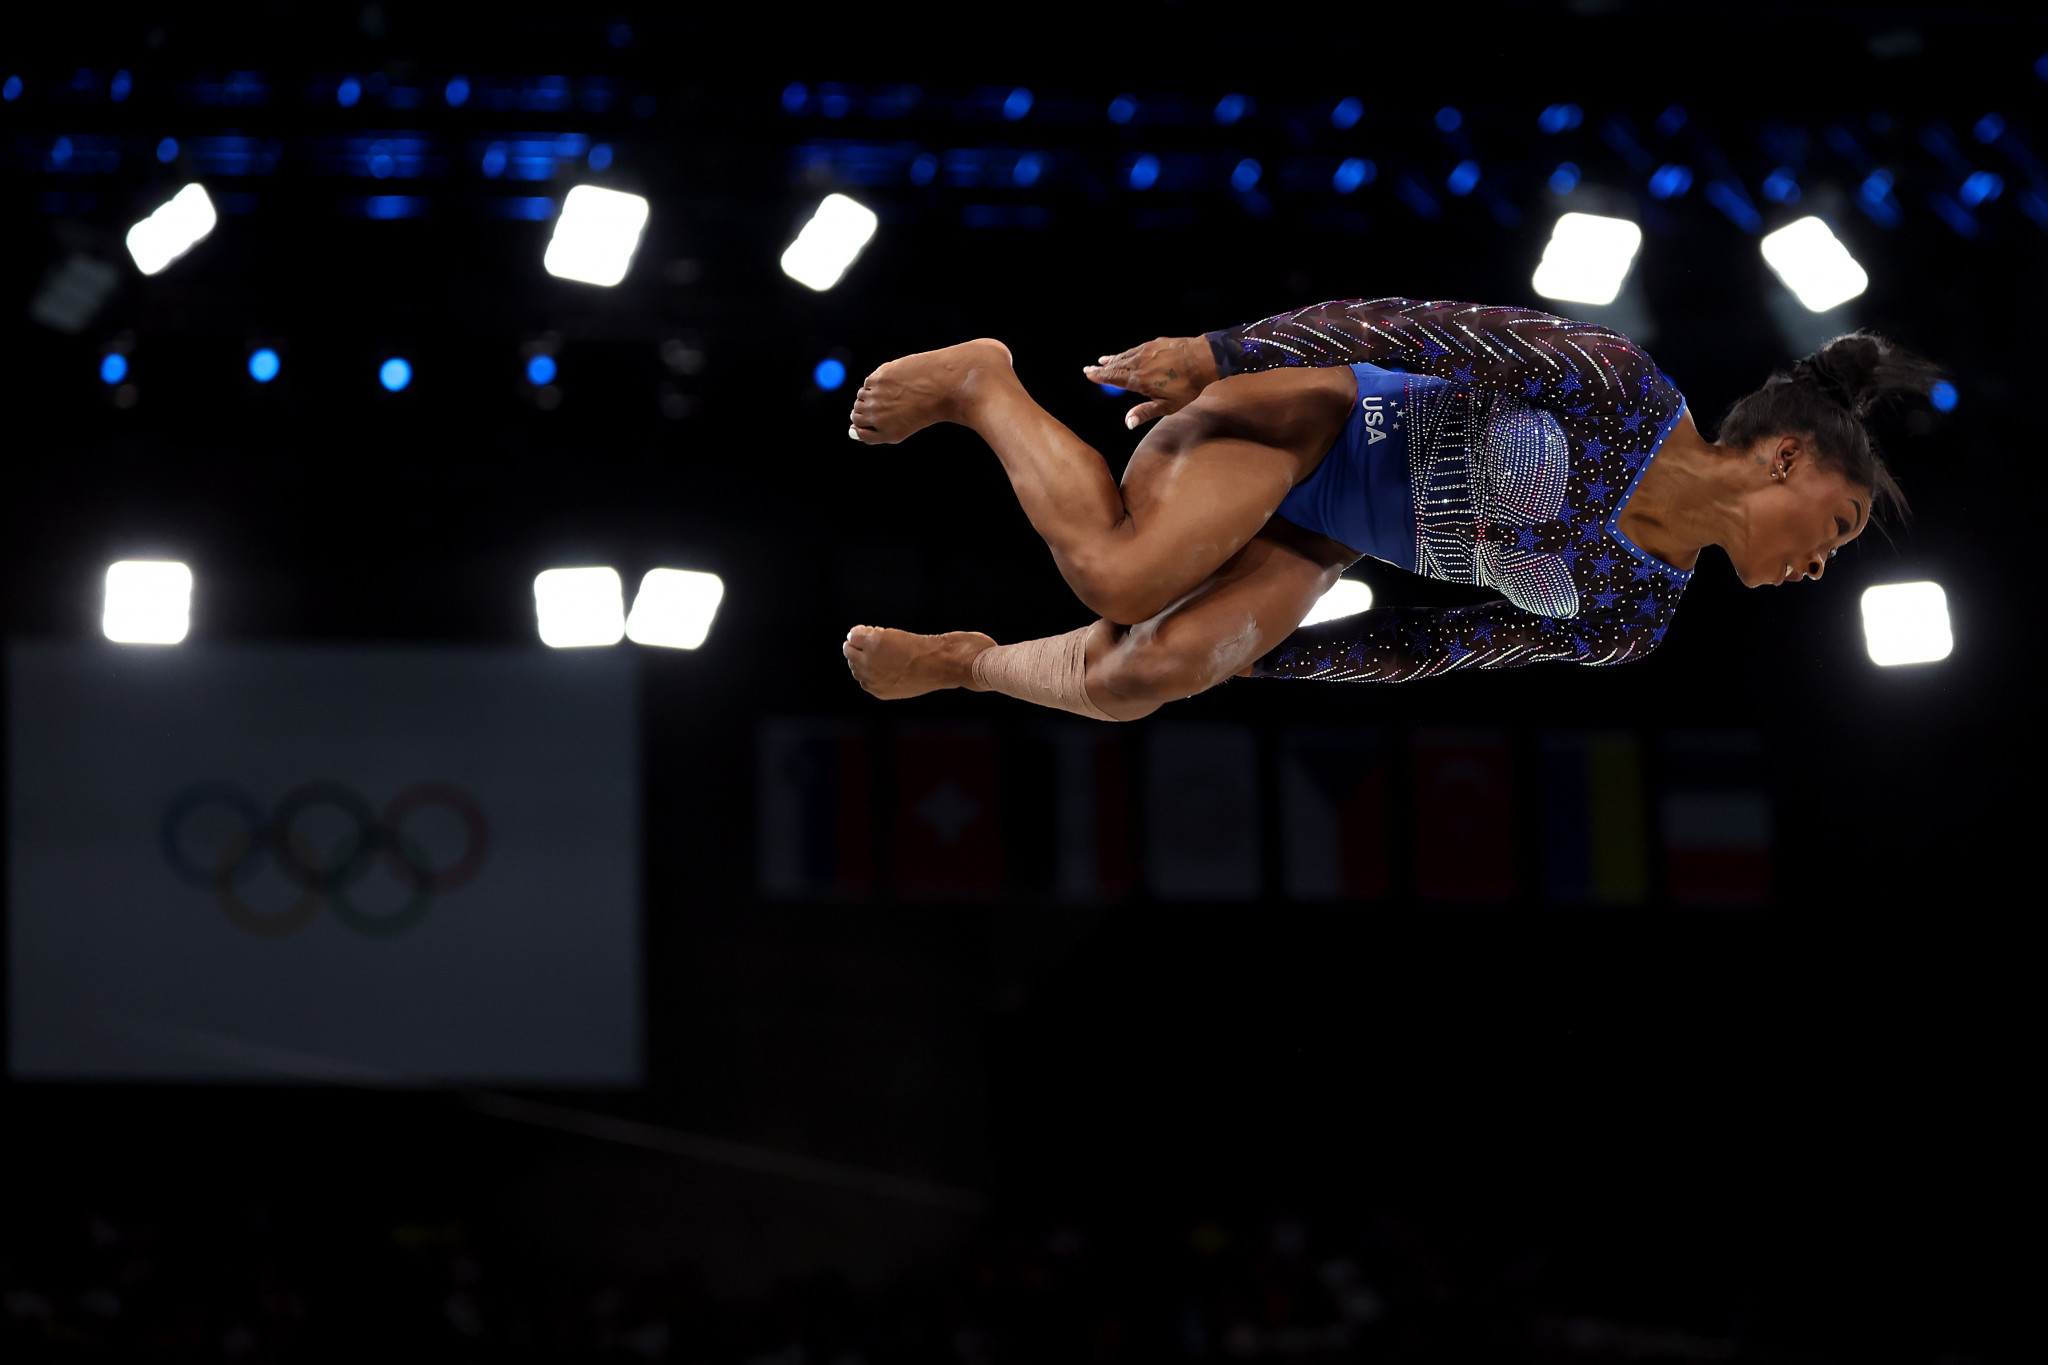 Simone Biles of Team United States competes during the Artistic Gymnastics Women's Individual All-Around Final at the Paris 2024 Olympic Games. GETTY IMAGES